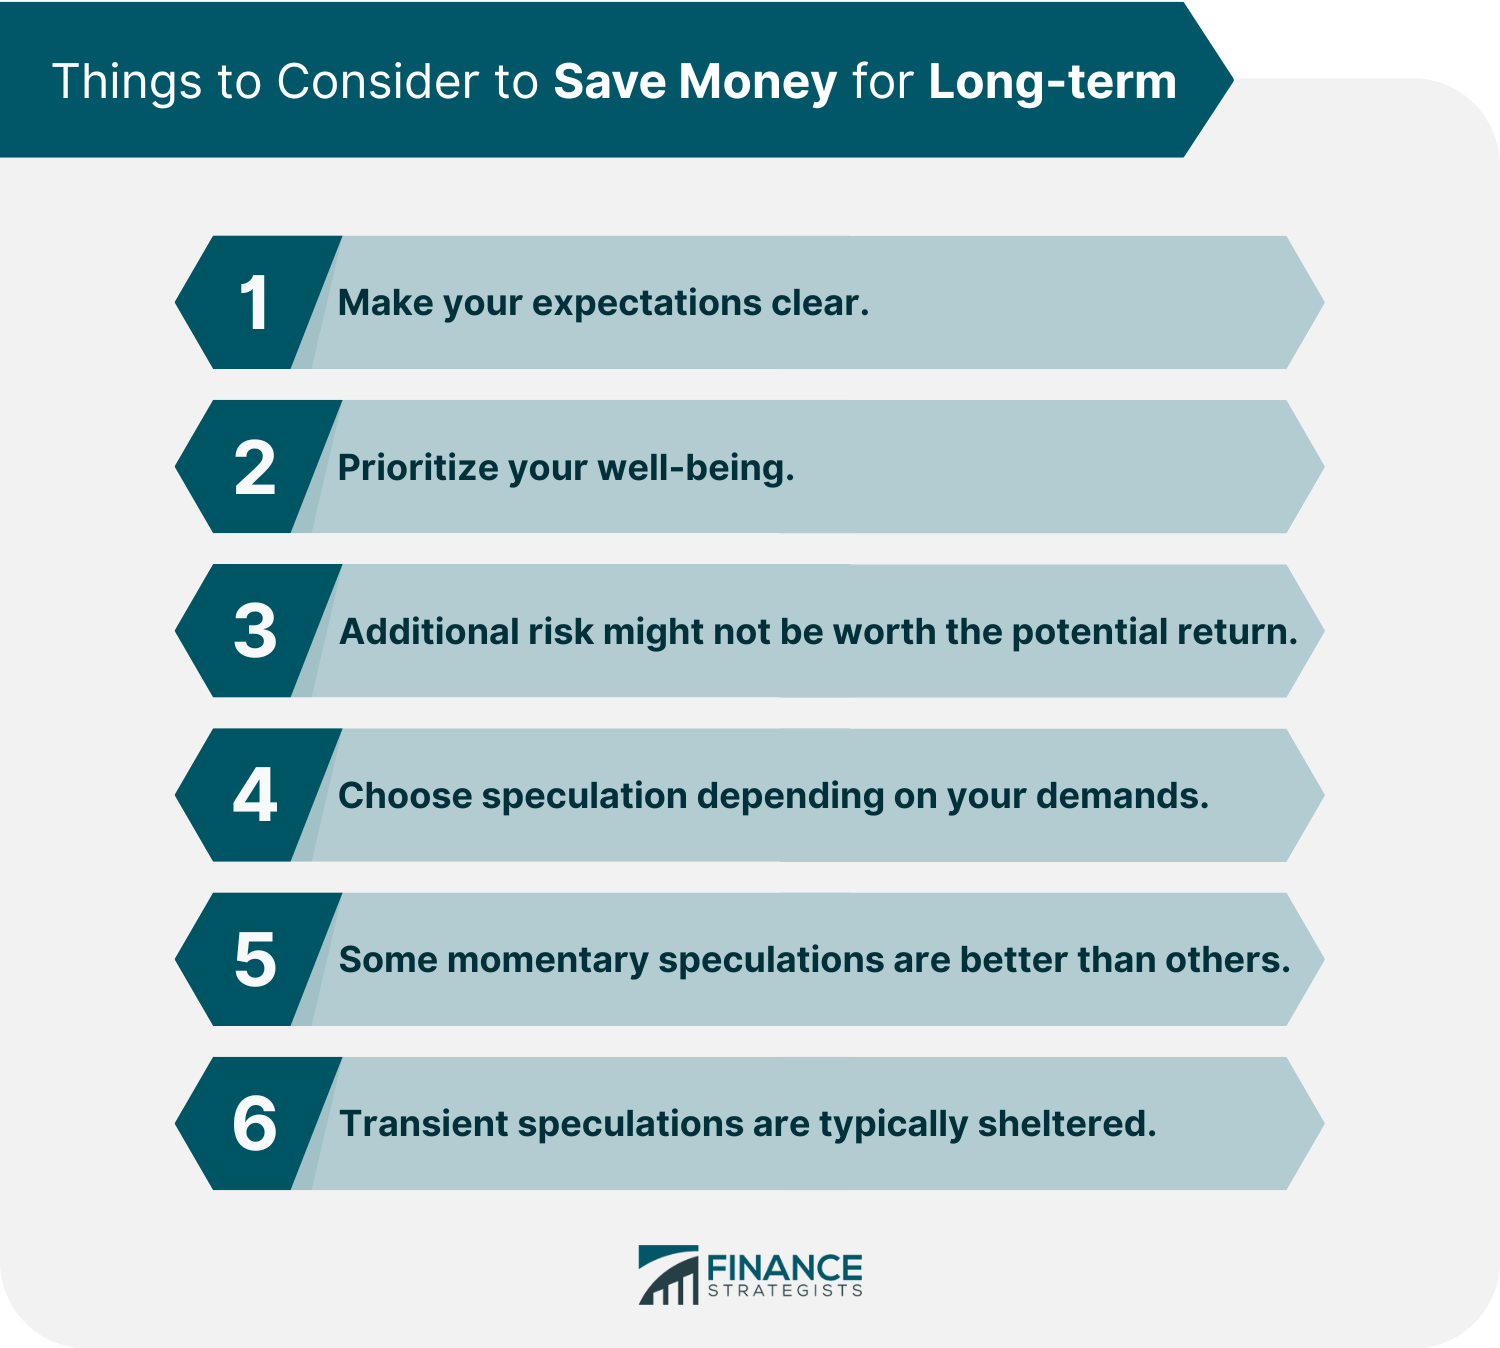 Things to Consider to Save Money for Long-term